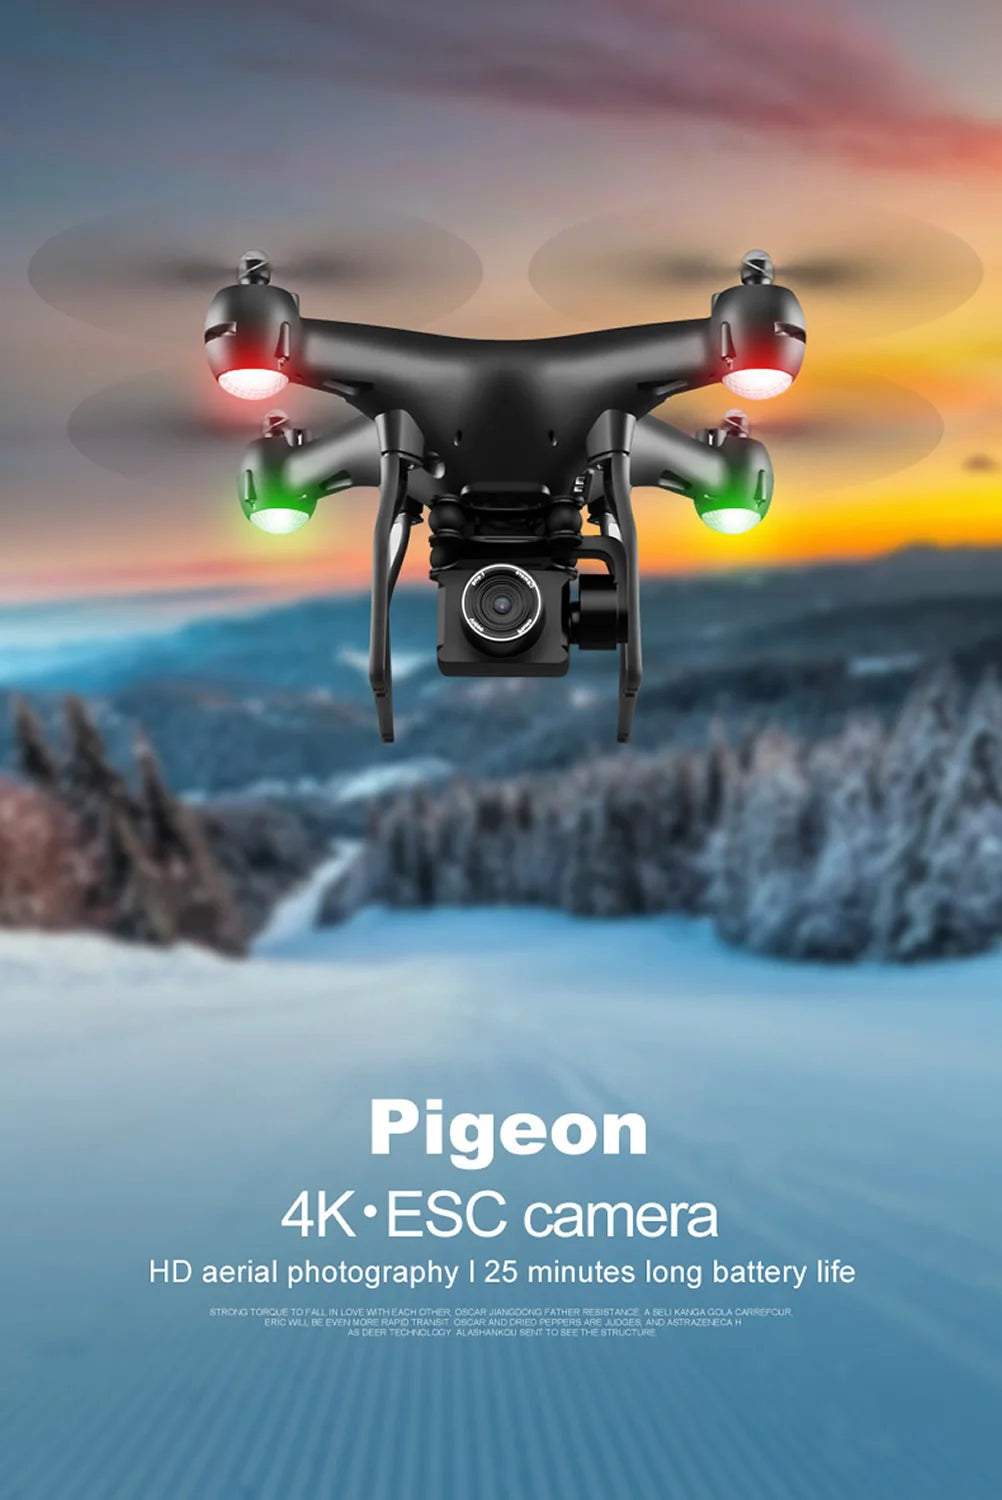 New Remote Control Drone, pigeon 4k esc camera hd aerial photography